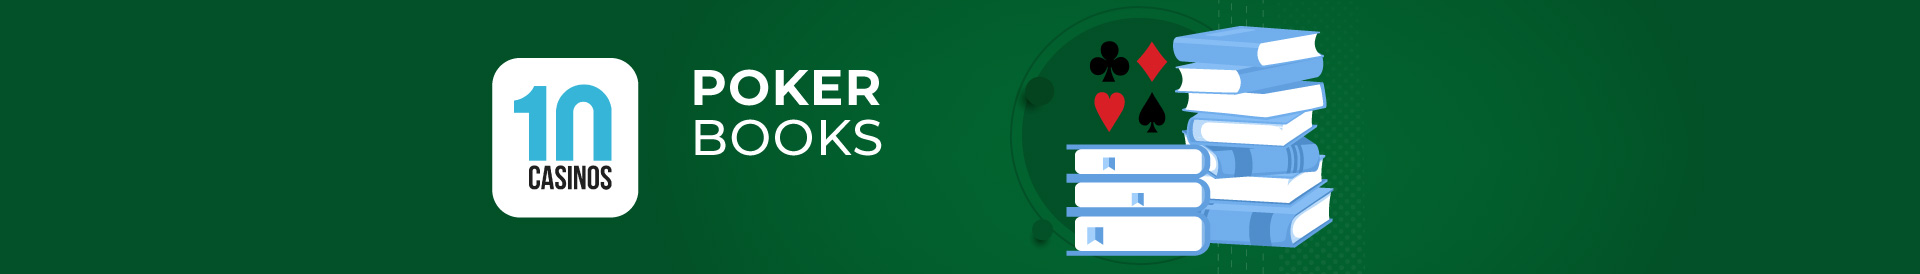 top 10 poker books you have to read desktop